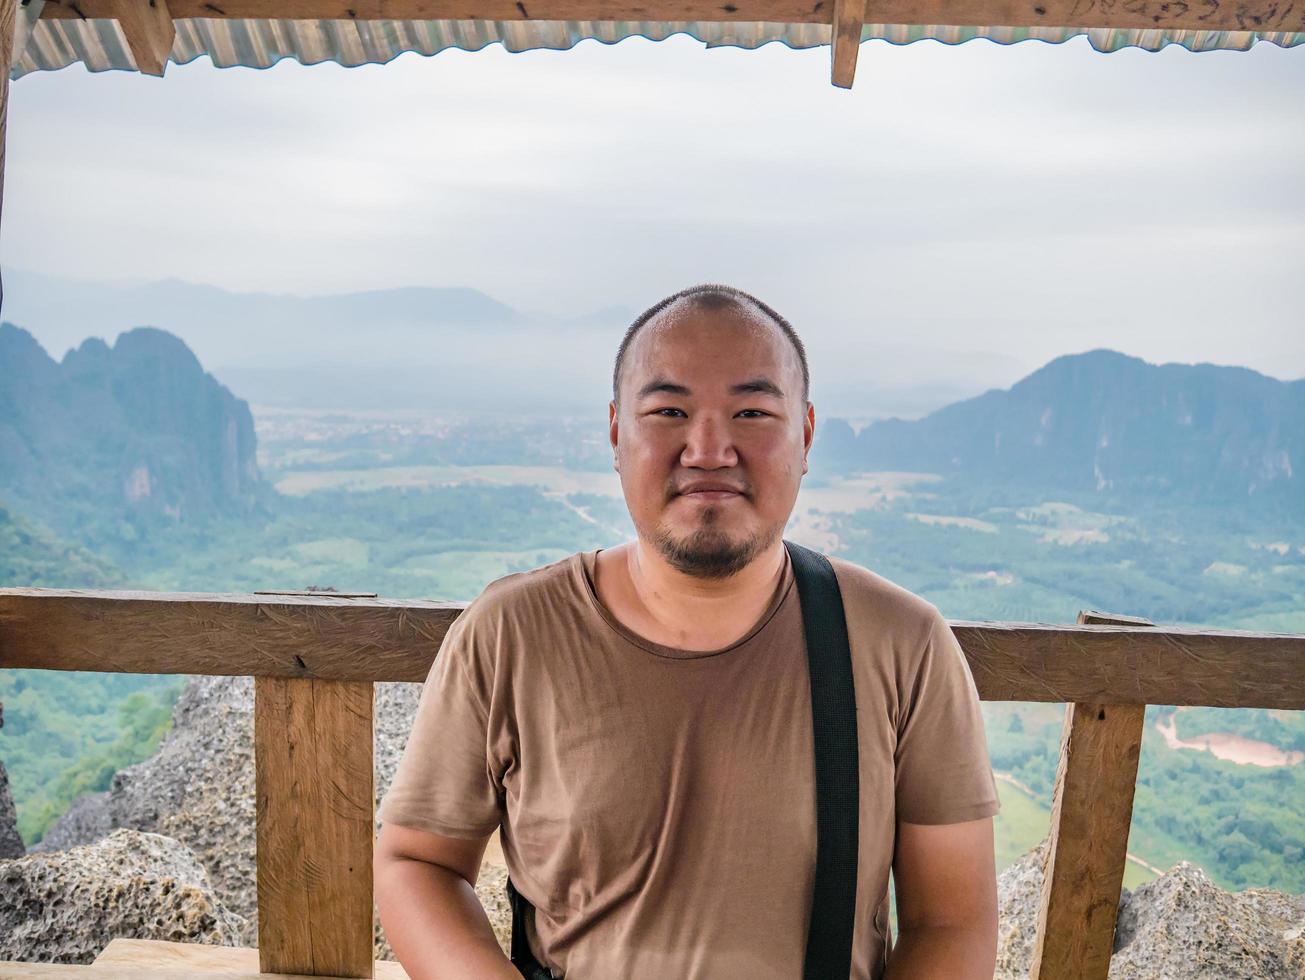 Portrail photo of Fat tourist with beautiful view on the peak of Pha Ngeun in vangvieng City Laos.Vangvieng City The famous holiday destination town in Lao.